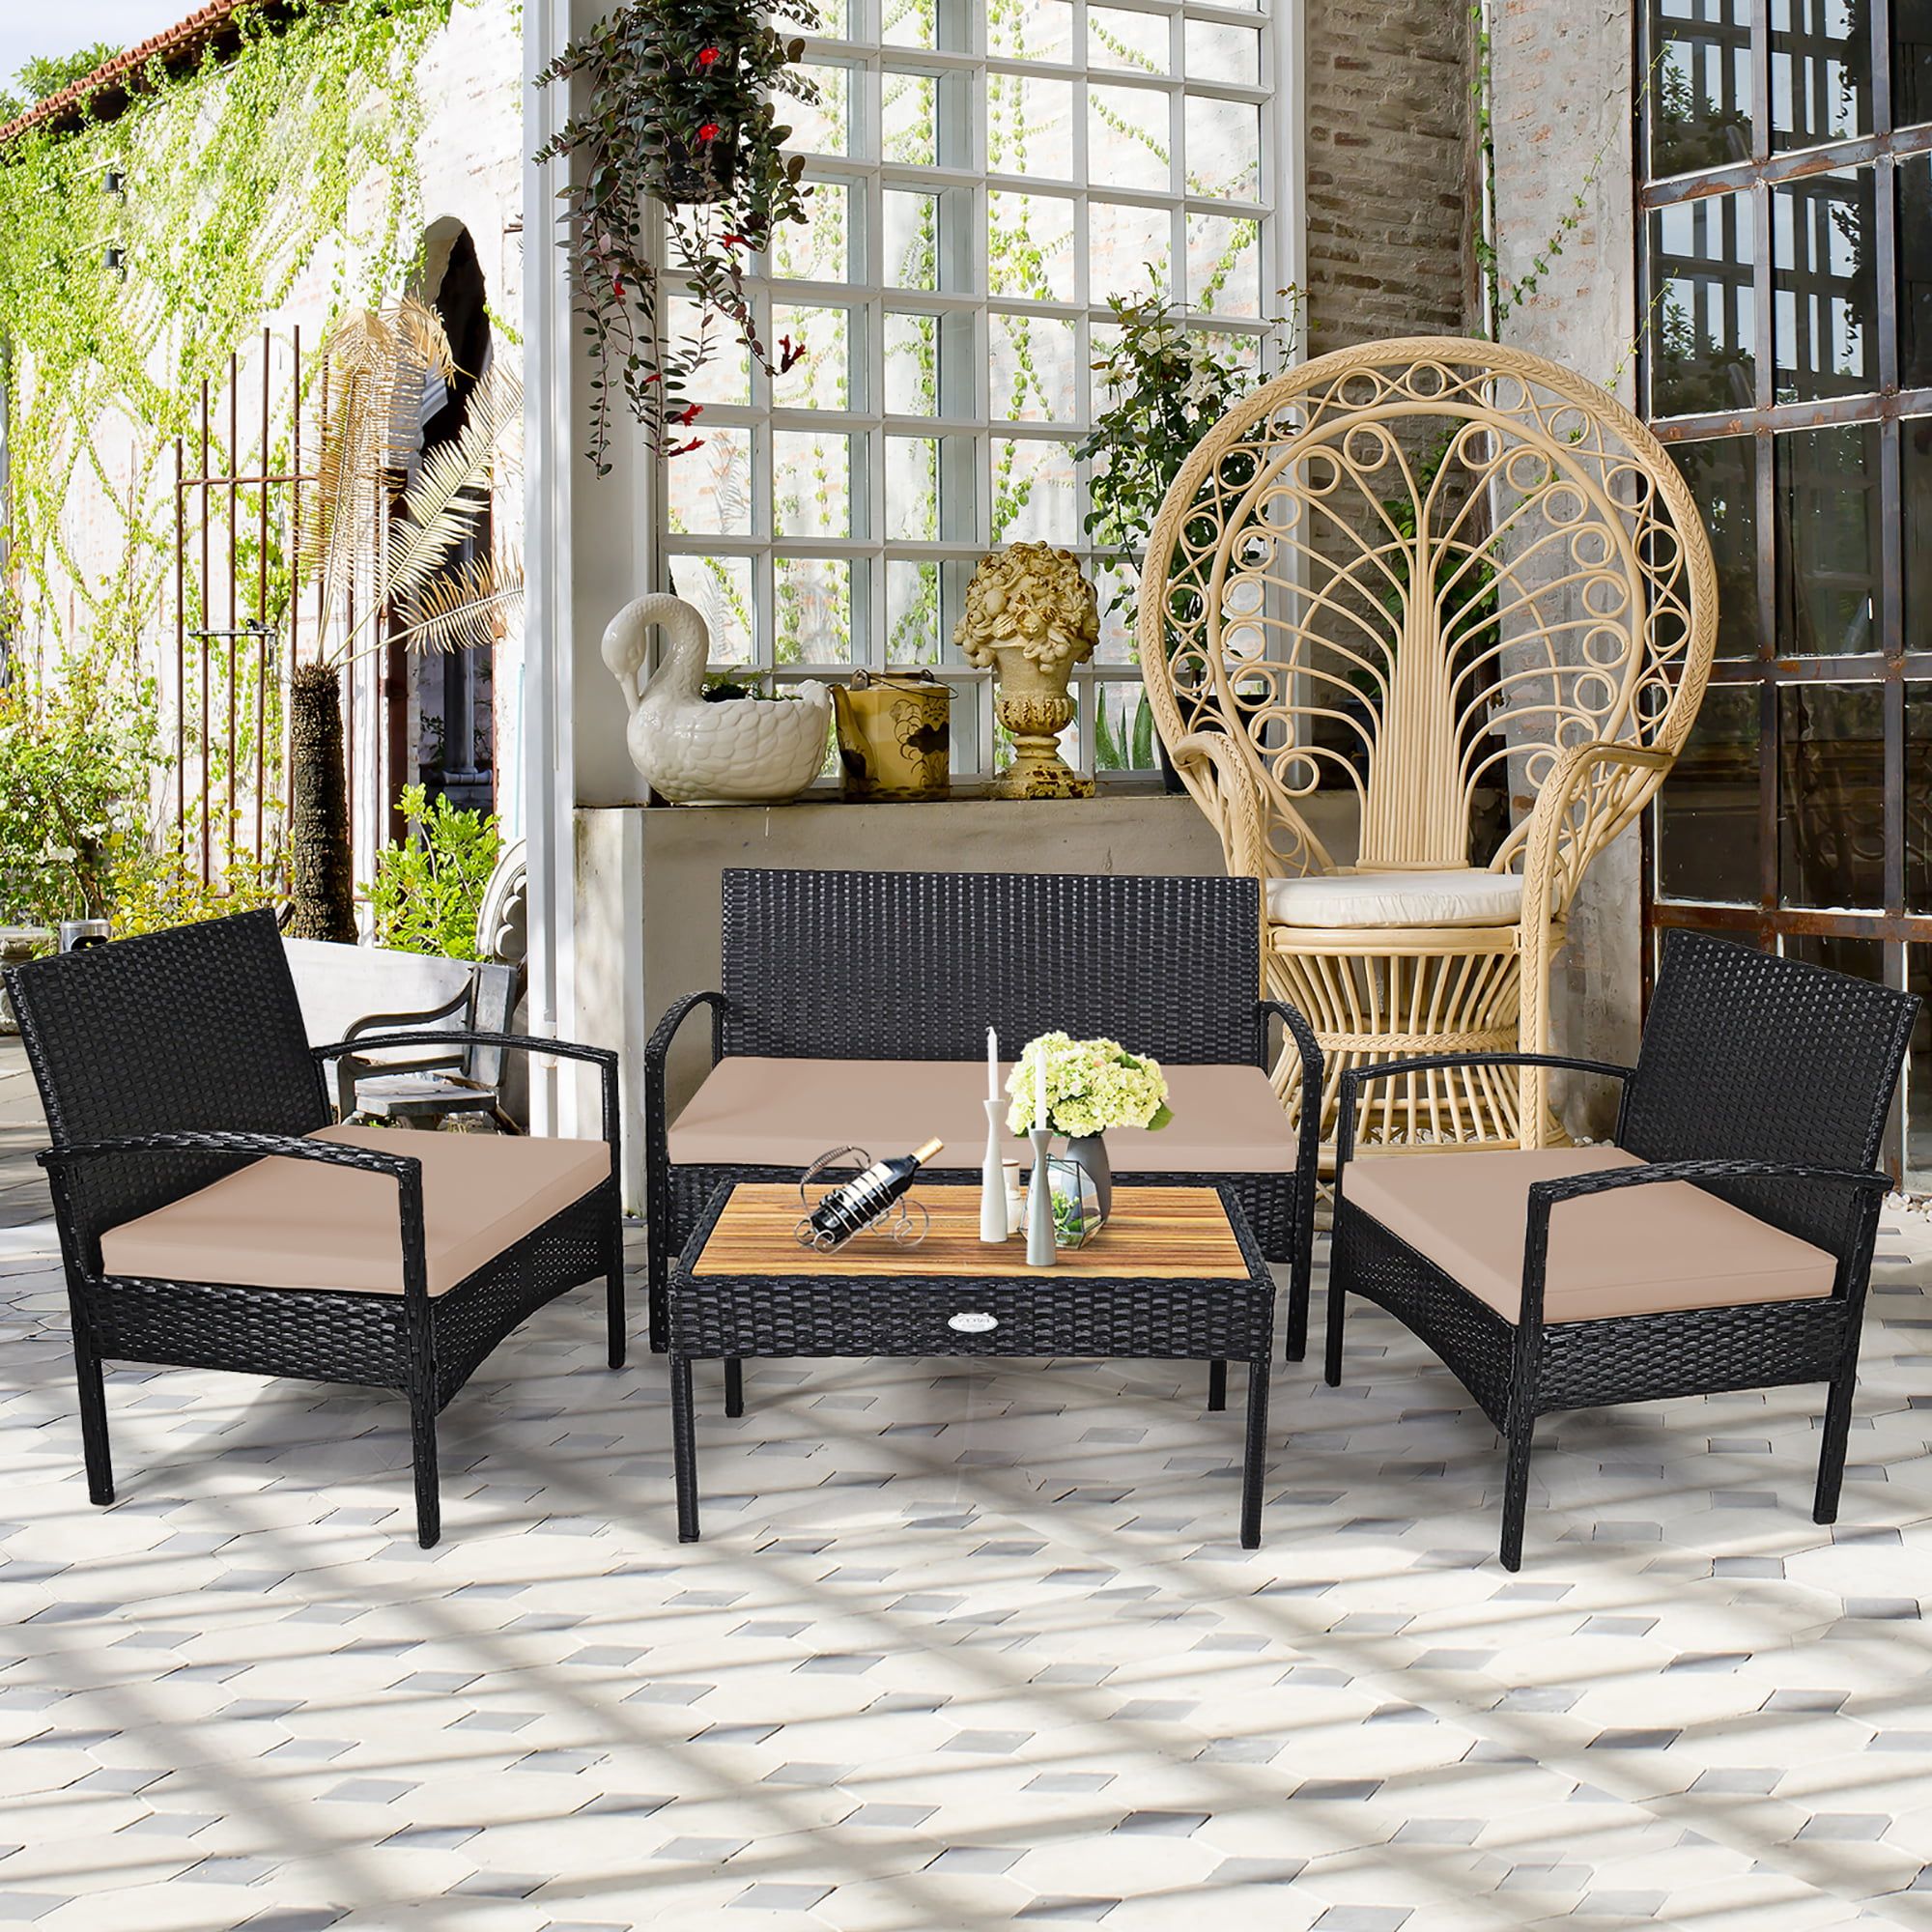 Costway 4pcs Patio Rattan Furniture Set Sofa Chair Coffee Table W With Regard To 4pcs Rattan Patio Coffee Tables (View 6 of 15)